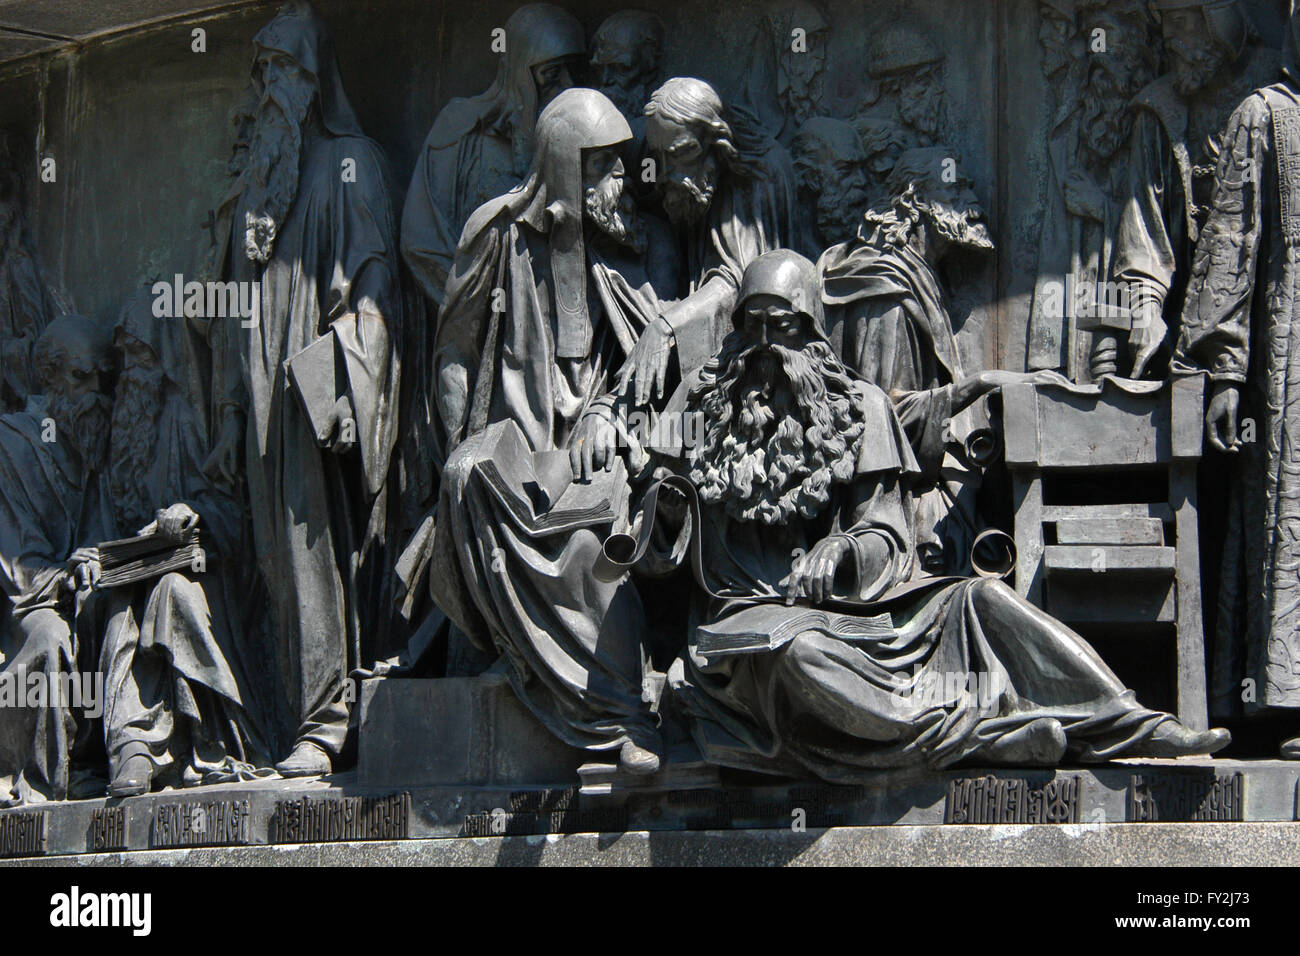 Metropolitan Alexius of Moscow, Saint Sergius of Radonezh and Maximus the Greek depicted (sitting from left to right) in the bas relief dedicated to Russian men of enlightenment by Russian sculptor Matvey Chizhov. Detail of the Monument to the Millennium of Russia (1862) designed by Mikhail Mikeshin in Veliky Novgorod, Russia. Saints Anthony and Theodosius of Kiev, Kuksha of the Kiev Caves, Nestor the Chronicler, Cyril of Beloozero and Stephen of Perm, Metropolitan Peter Mogila of Kiev, Saints Zosima and Sabbatius of Solovki, Metropolitan Jonah of Moscow, Metropolitan Macarius of Moscow, Archb Stock Photo